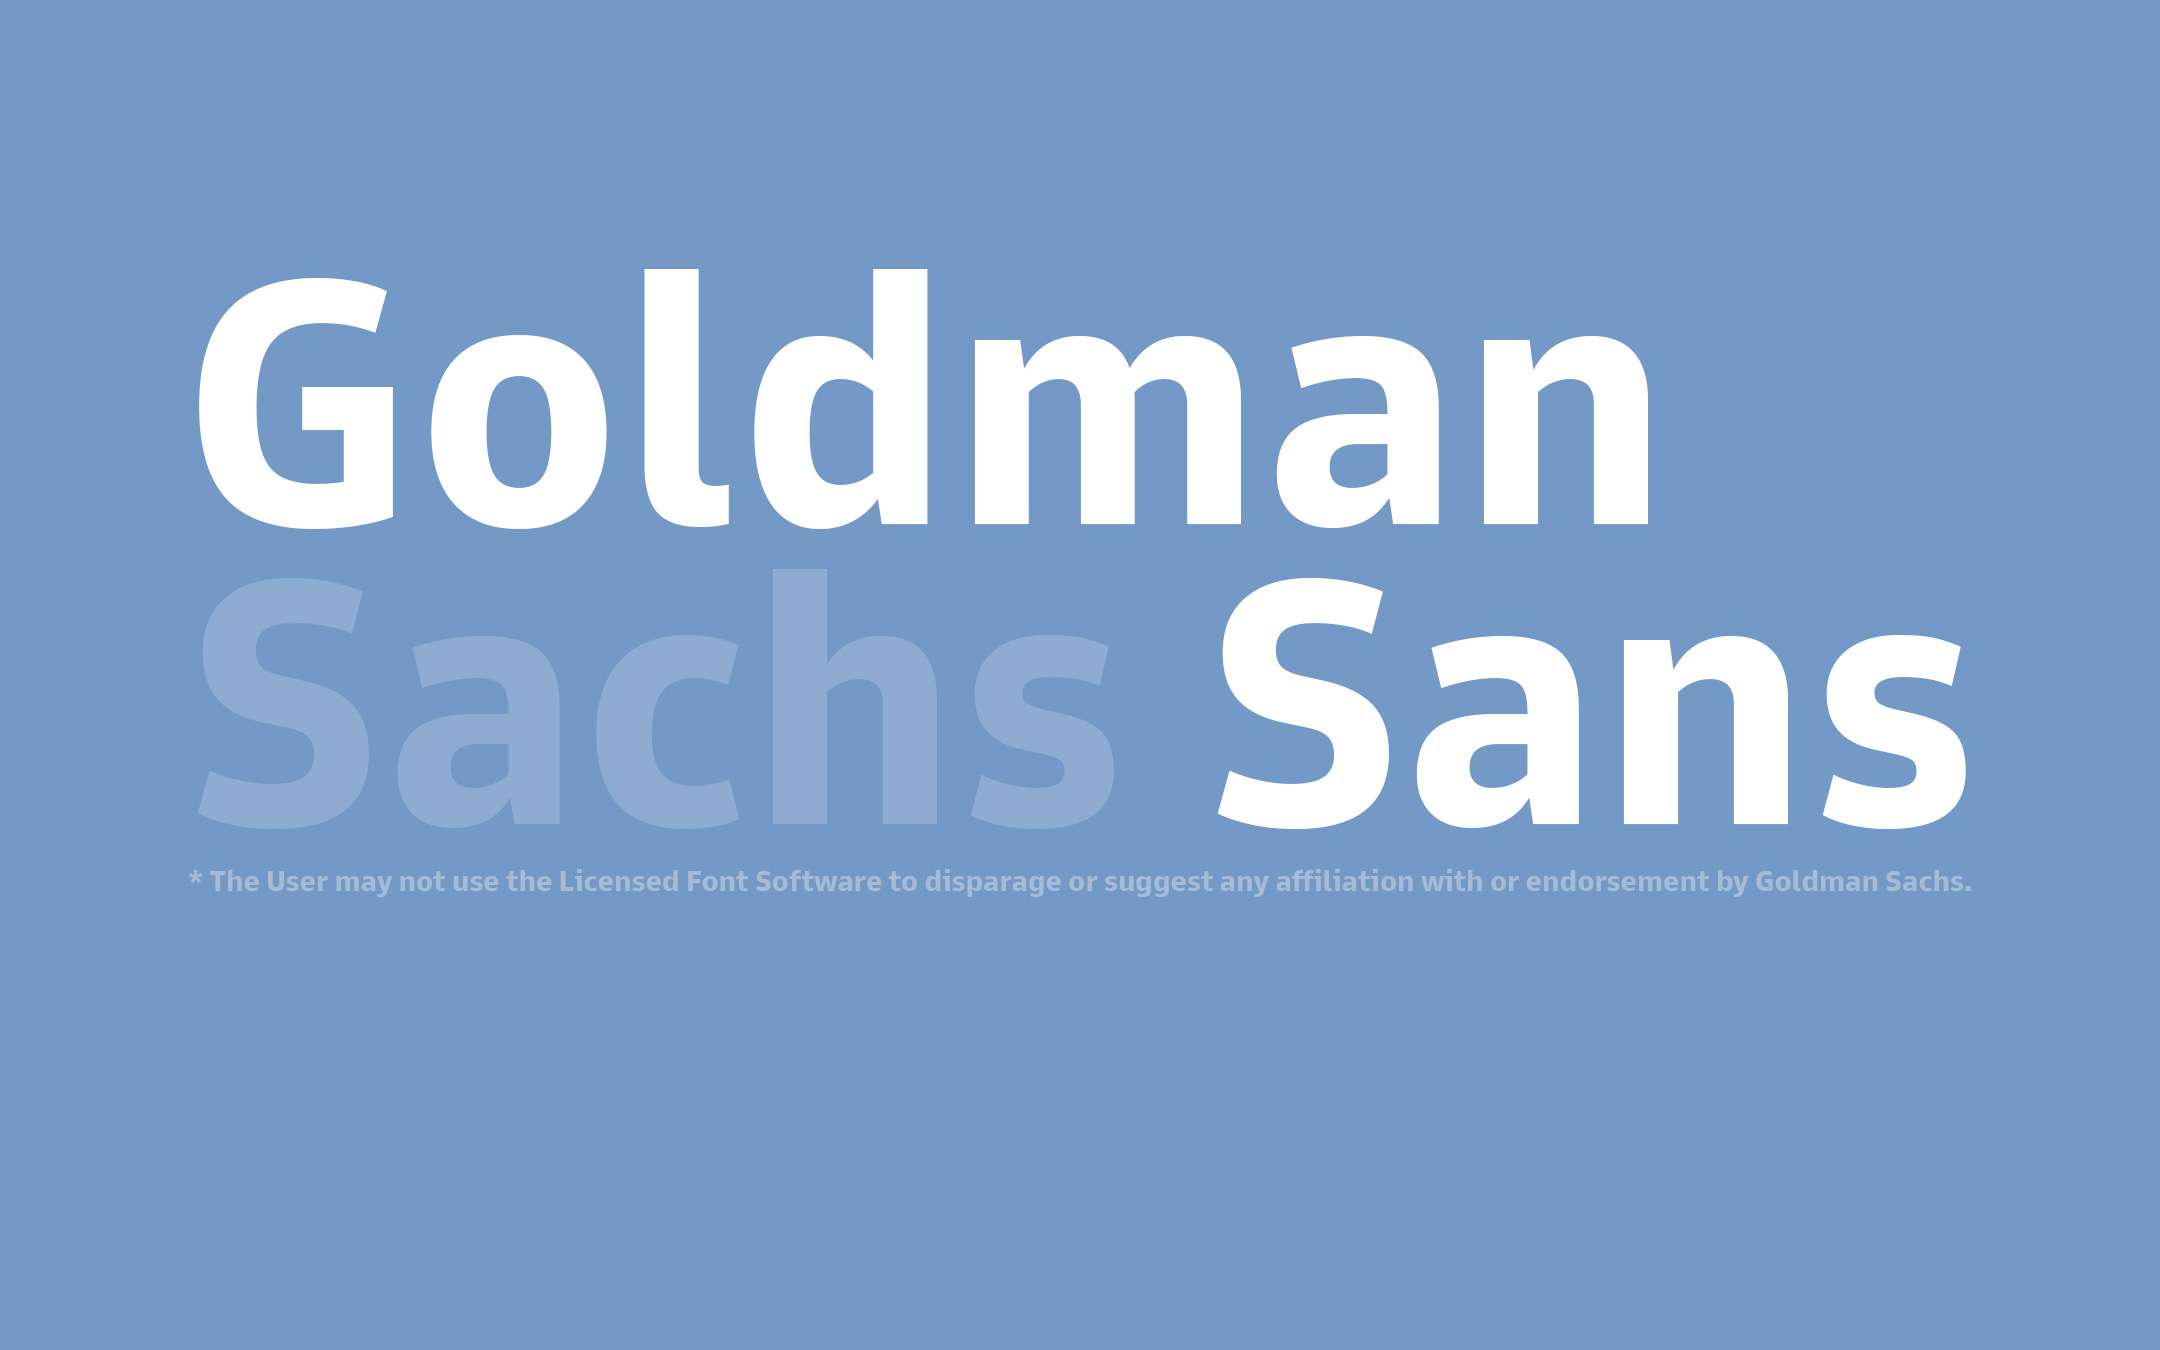 The first rule of Goldman Sans is ...